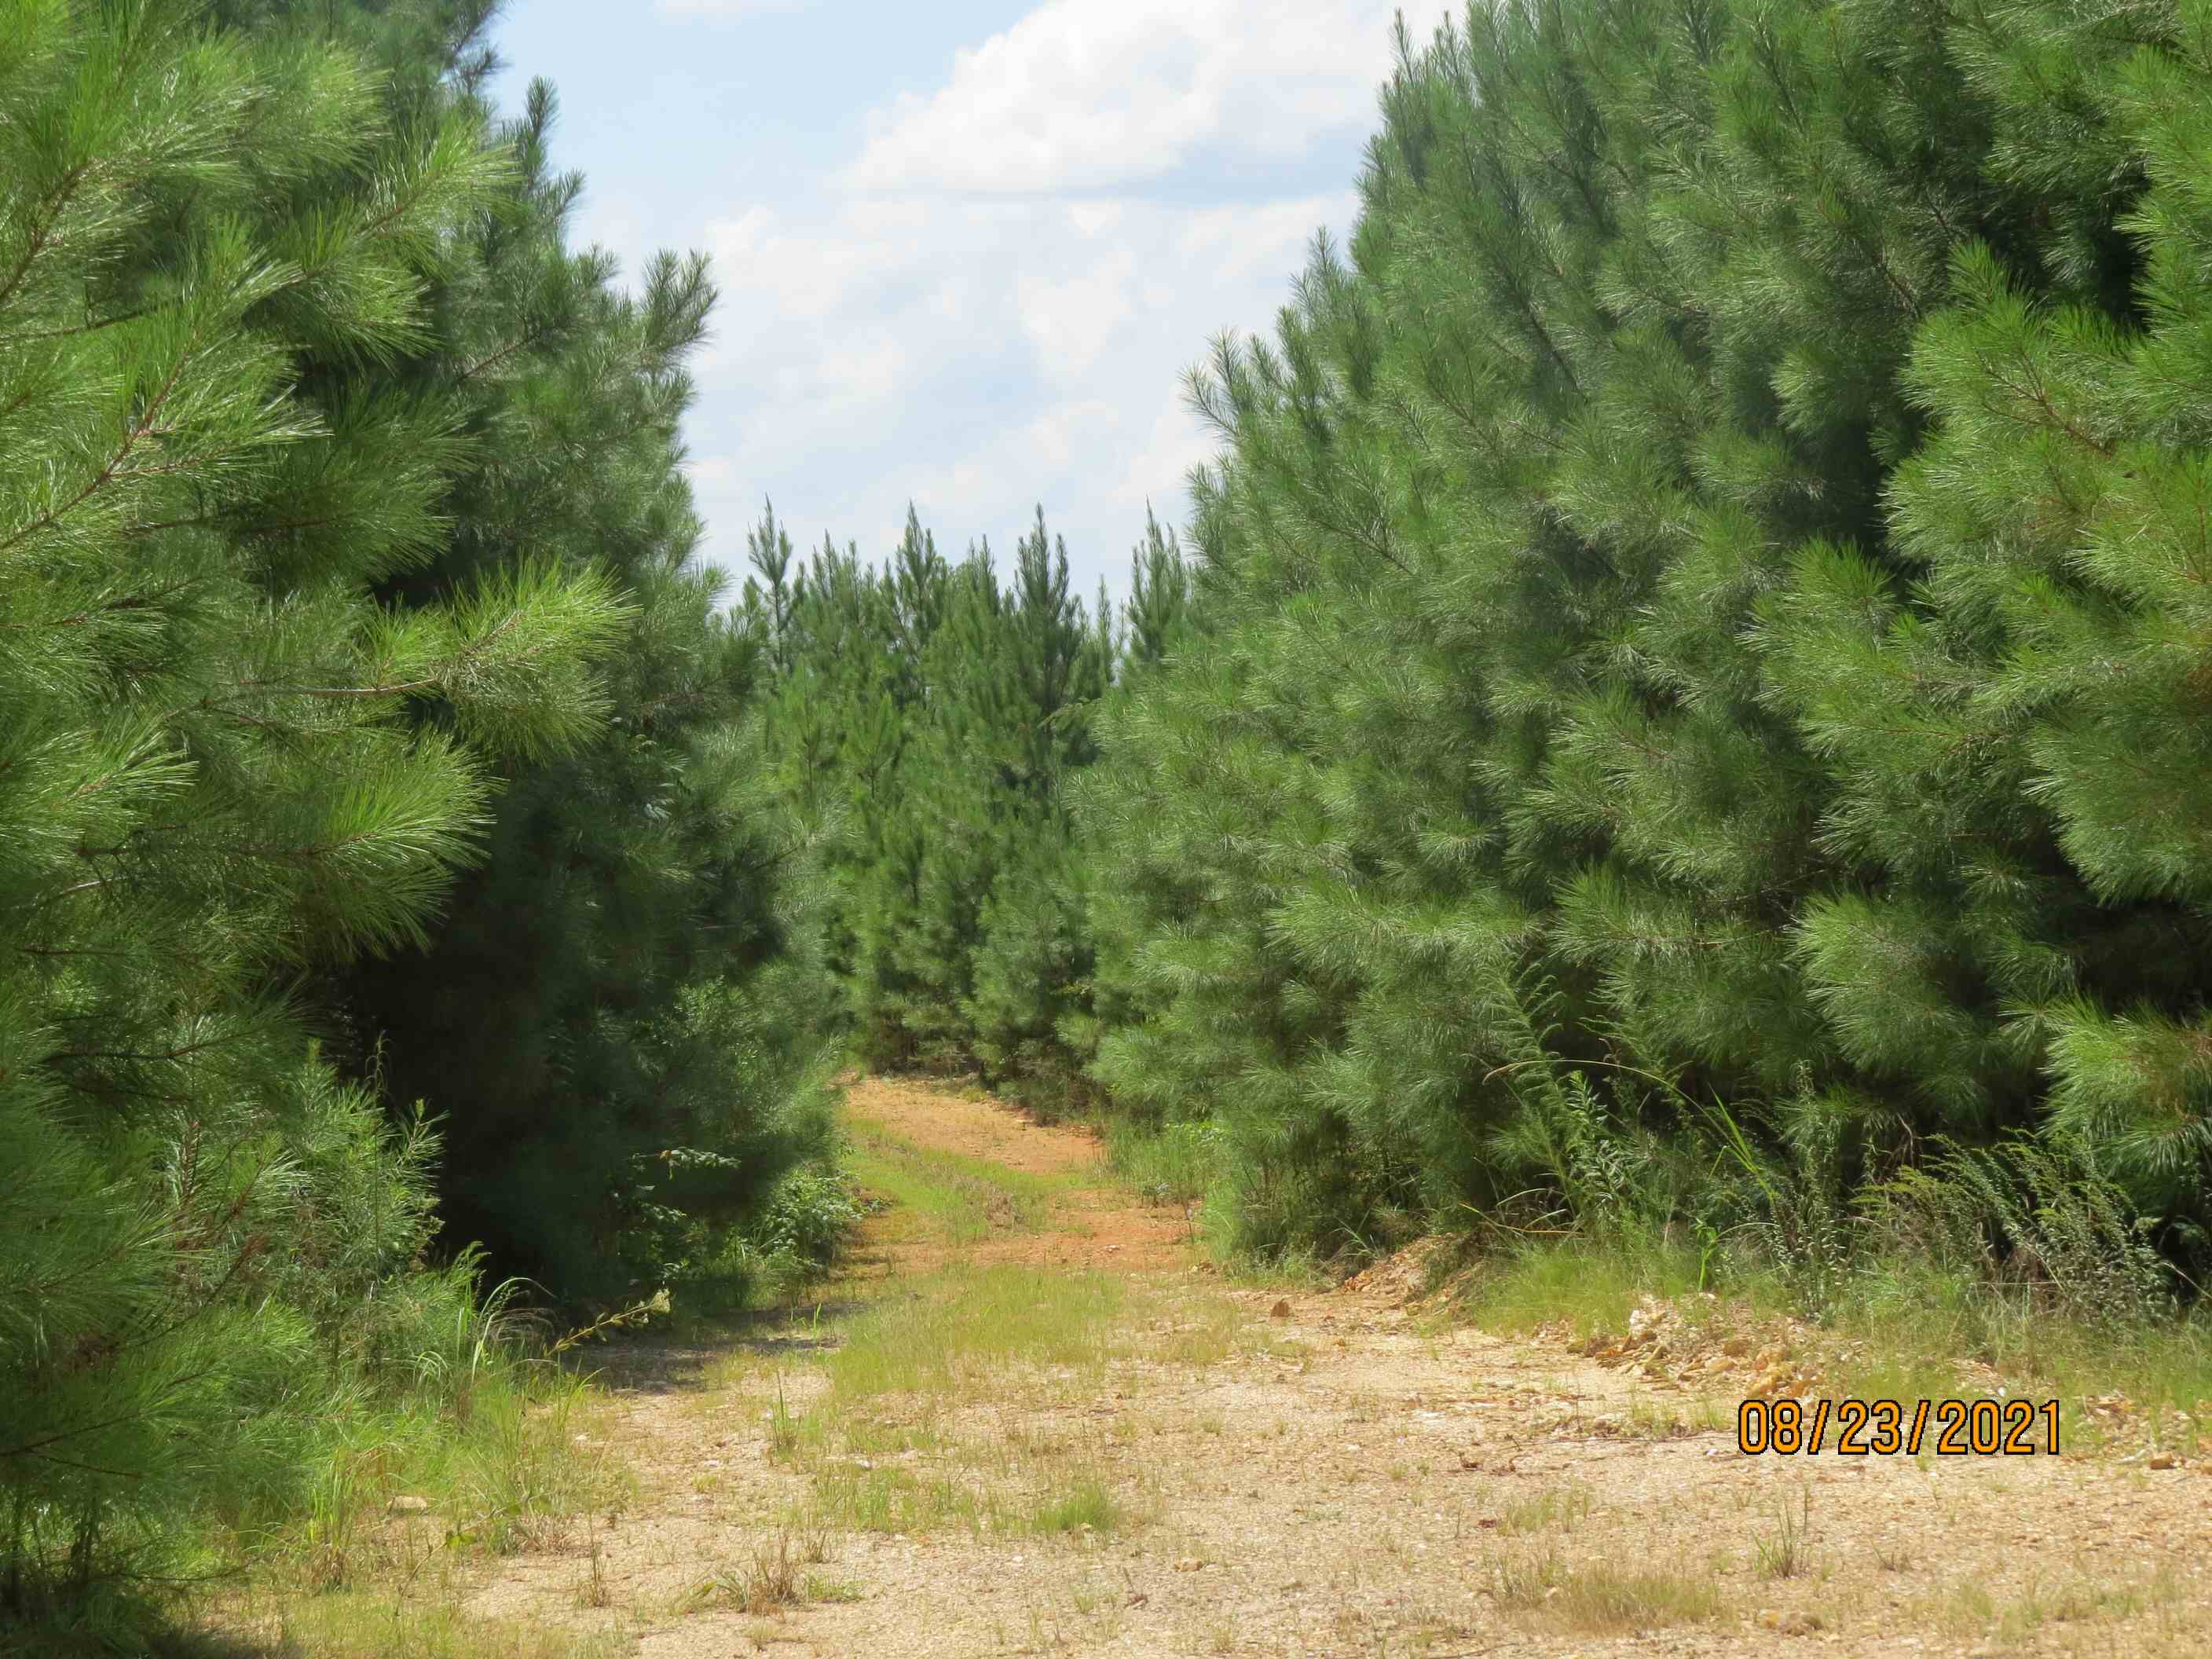 Some of the oldest planted pines (planted 2014 I believe)